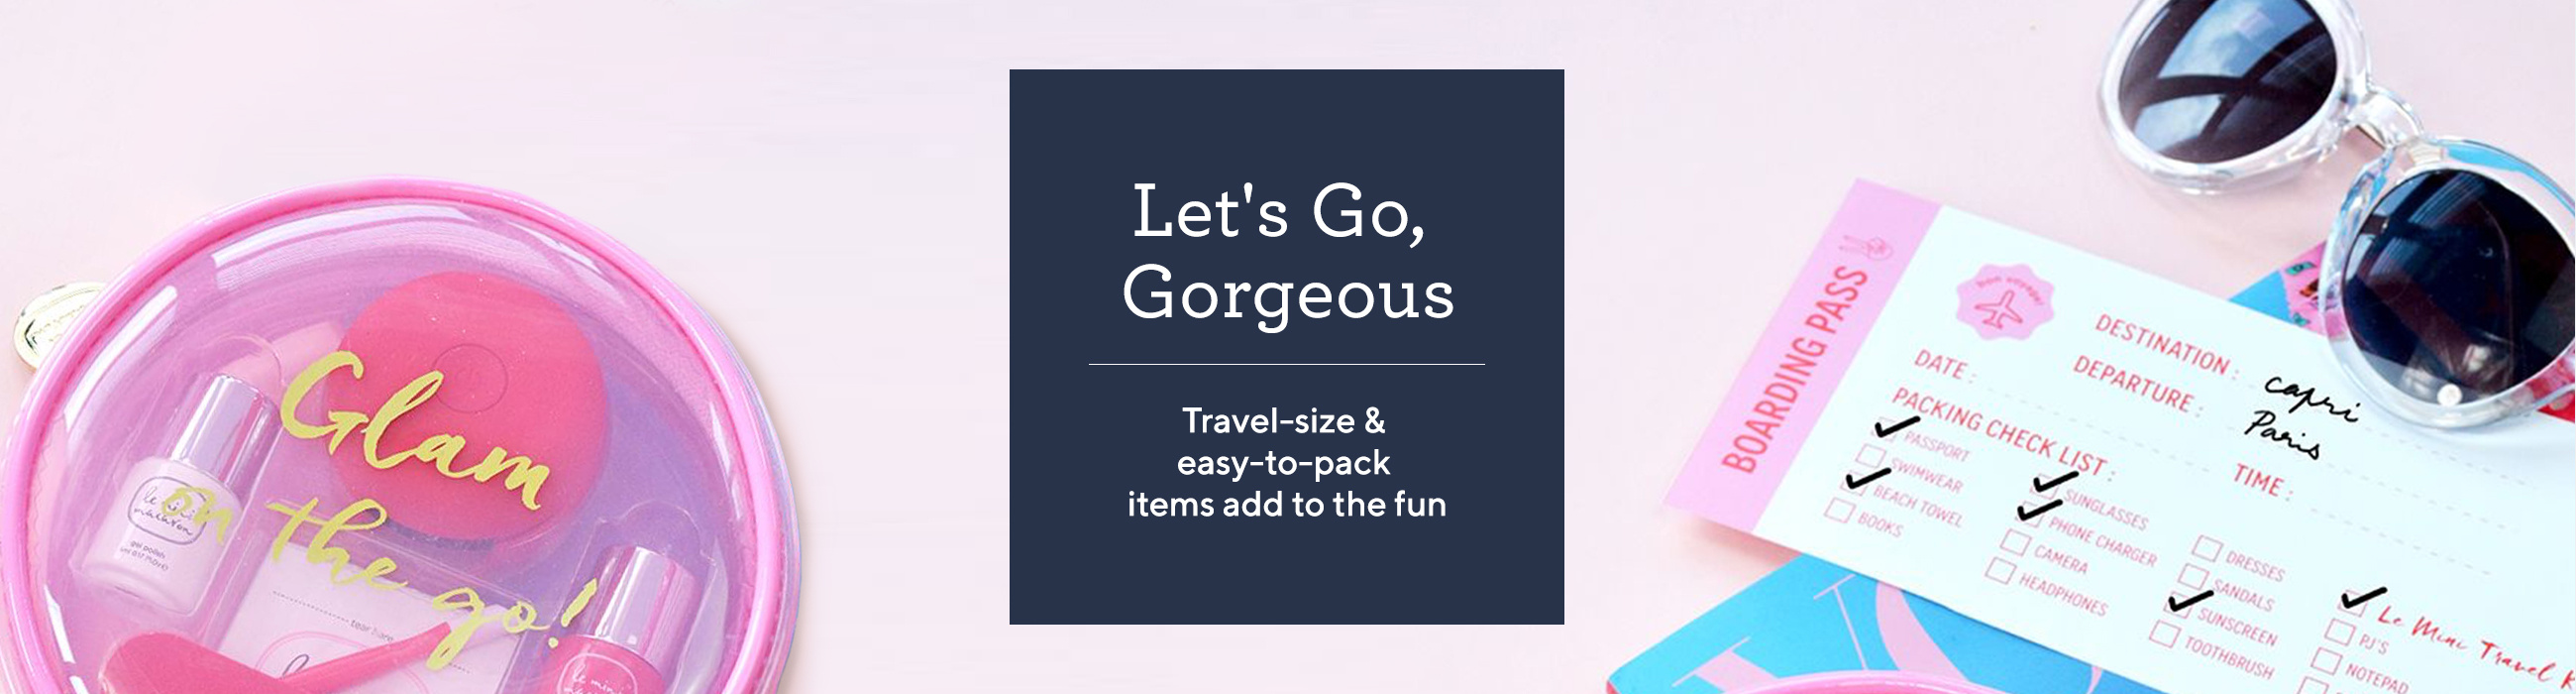 Let's Go, Gorgeous.  Travel-size & easy-to-pack items add to the fun.